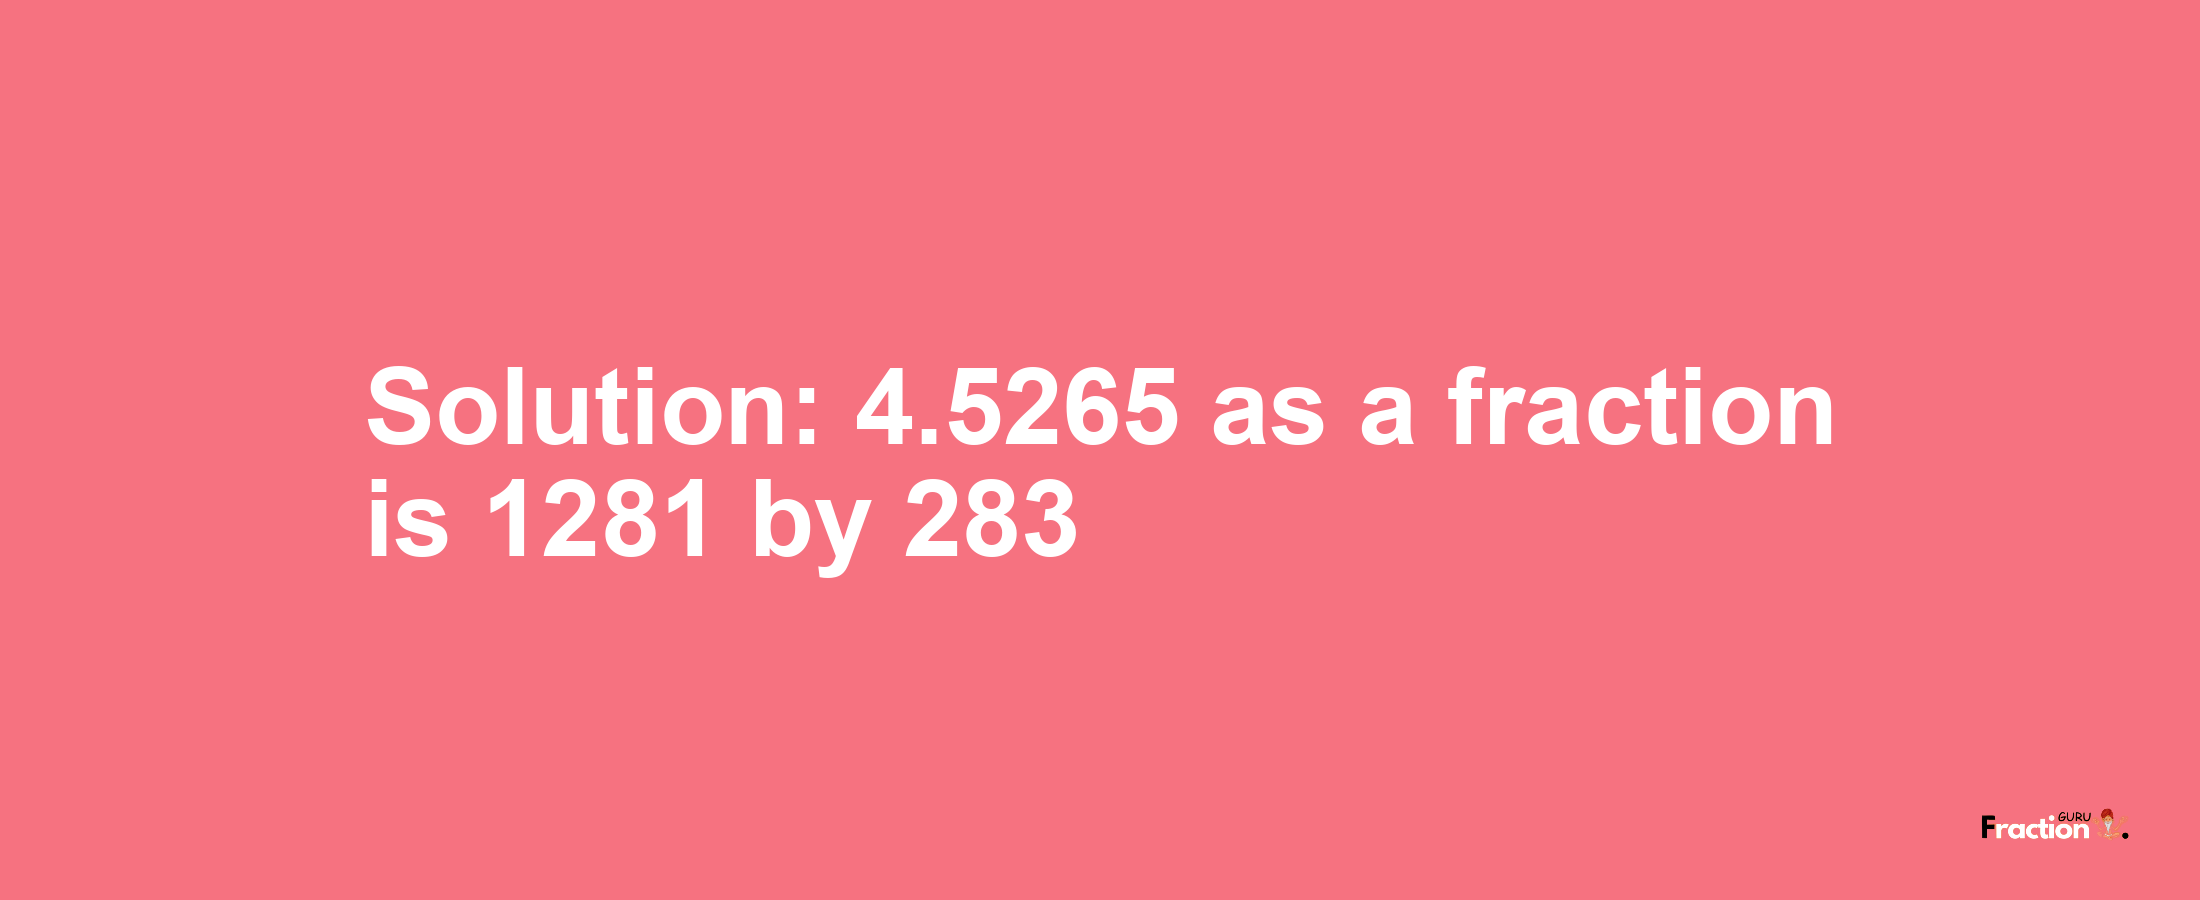 Solution:4.5265 as a fraction is 1281/283